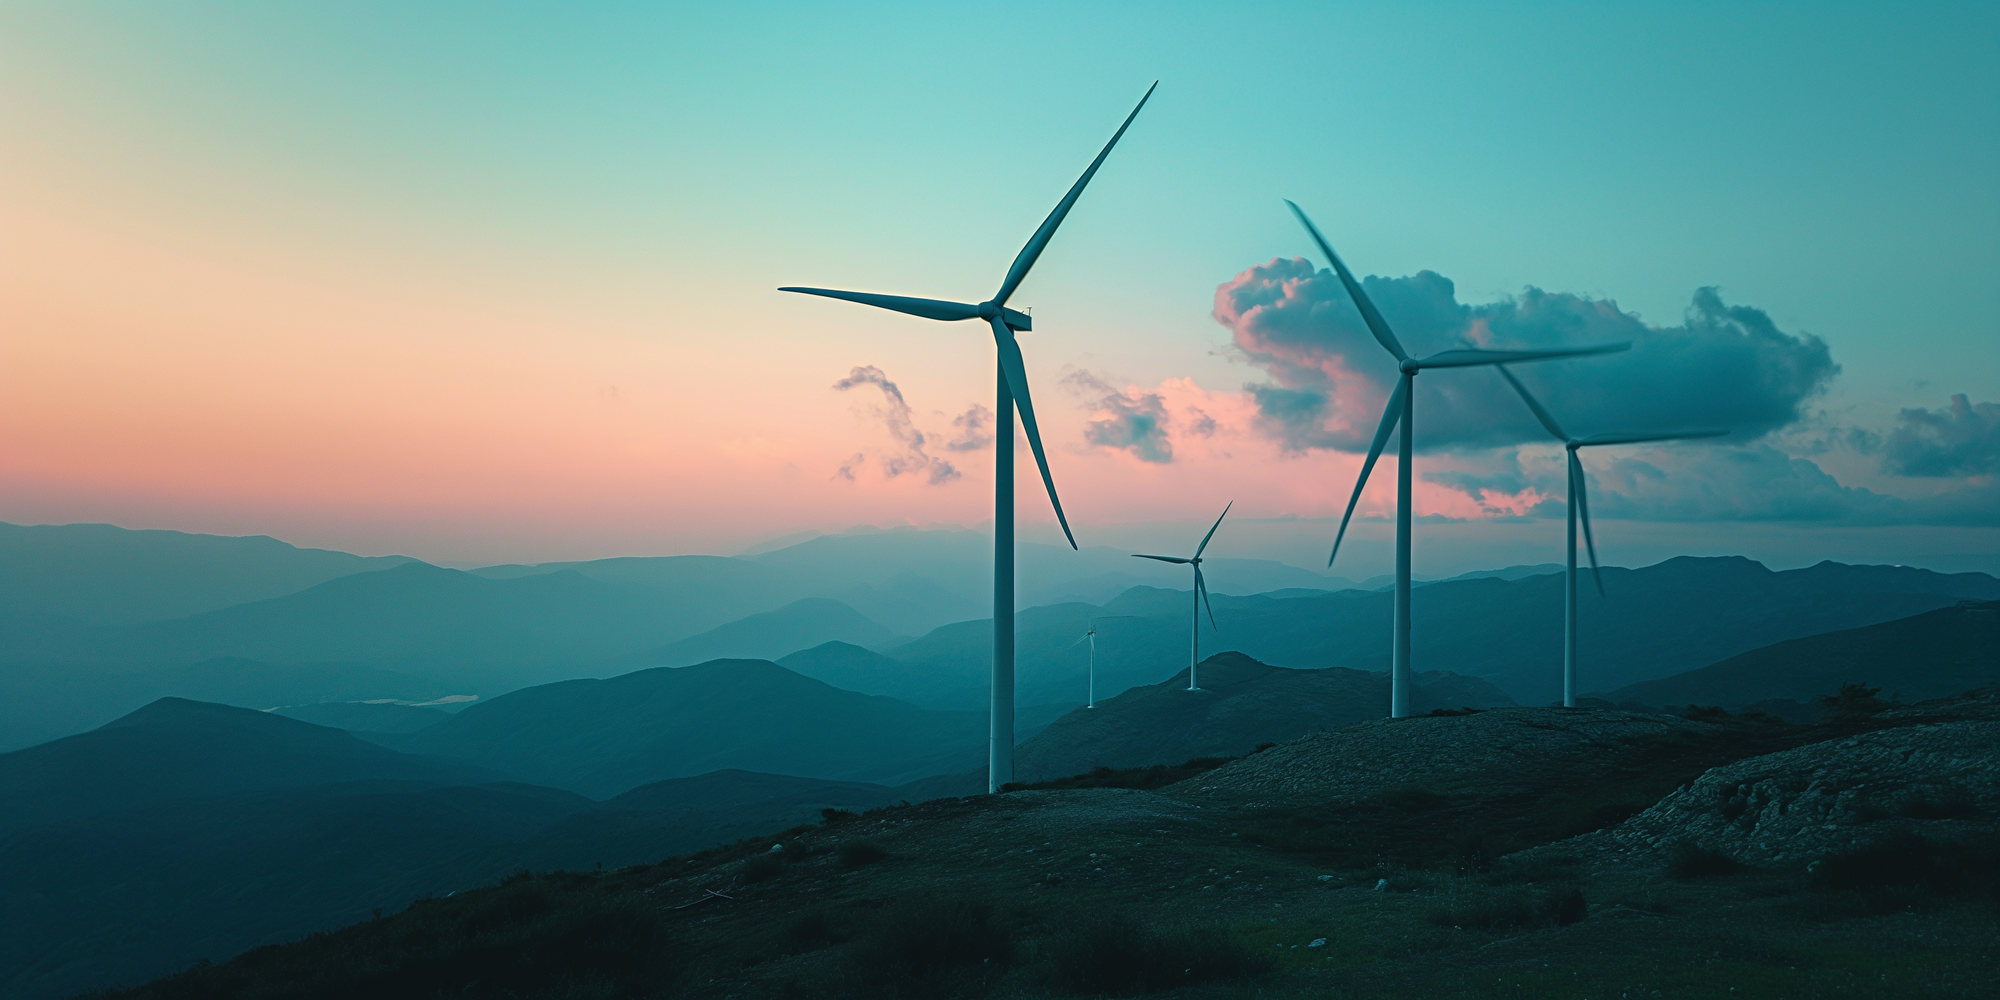 Wind turbines on a mountain ridge at dusk with a gradient sunset sky in the background.